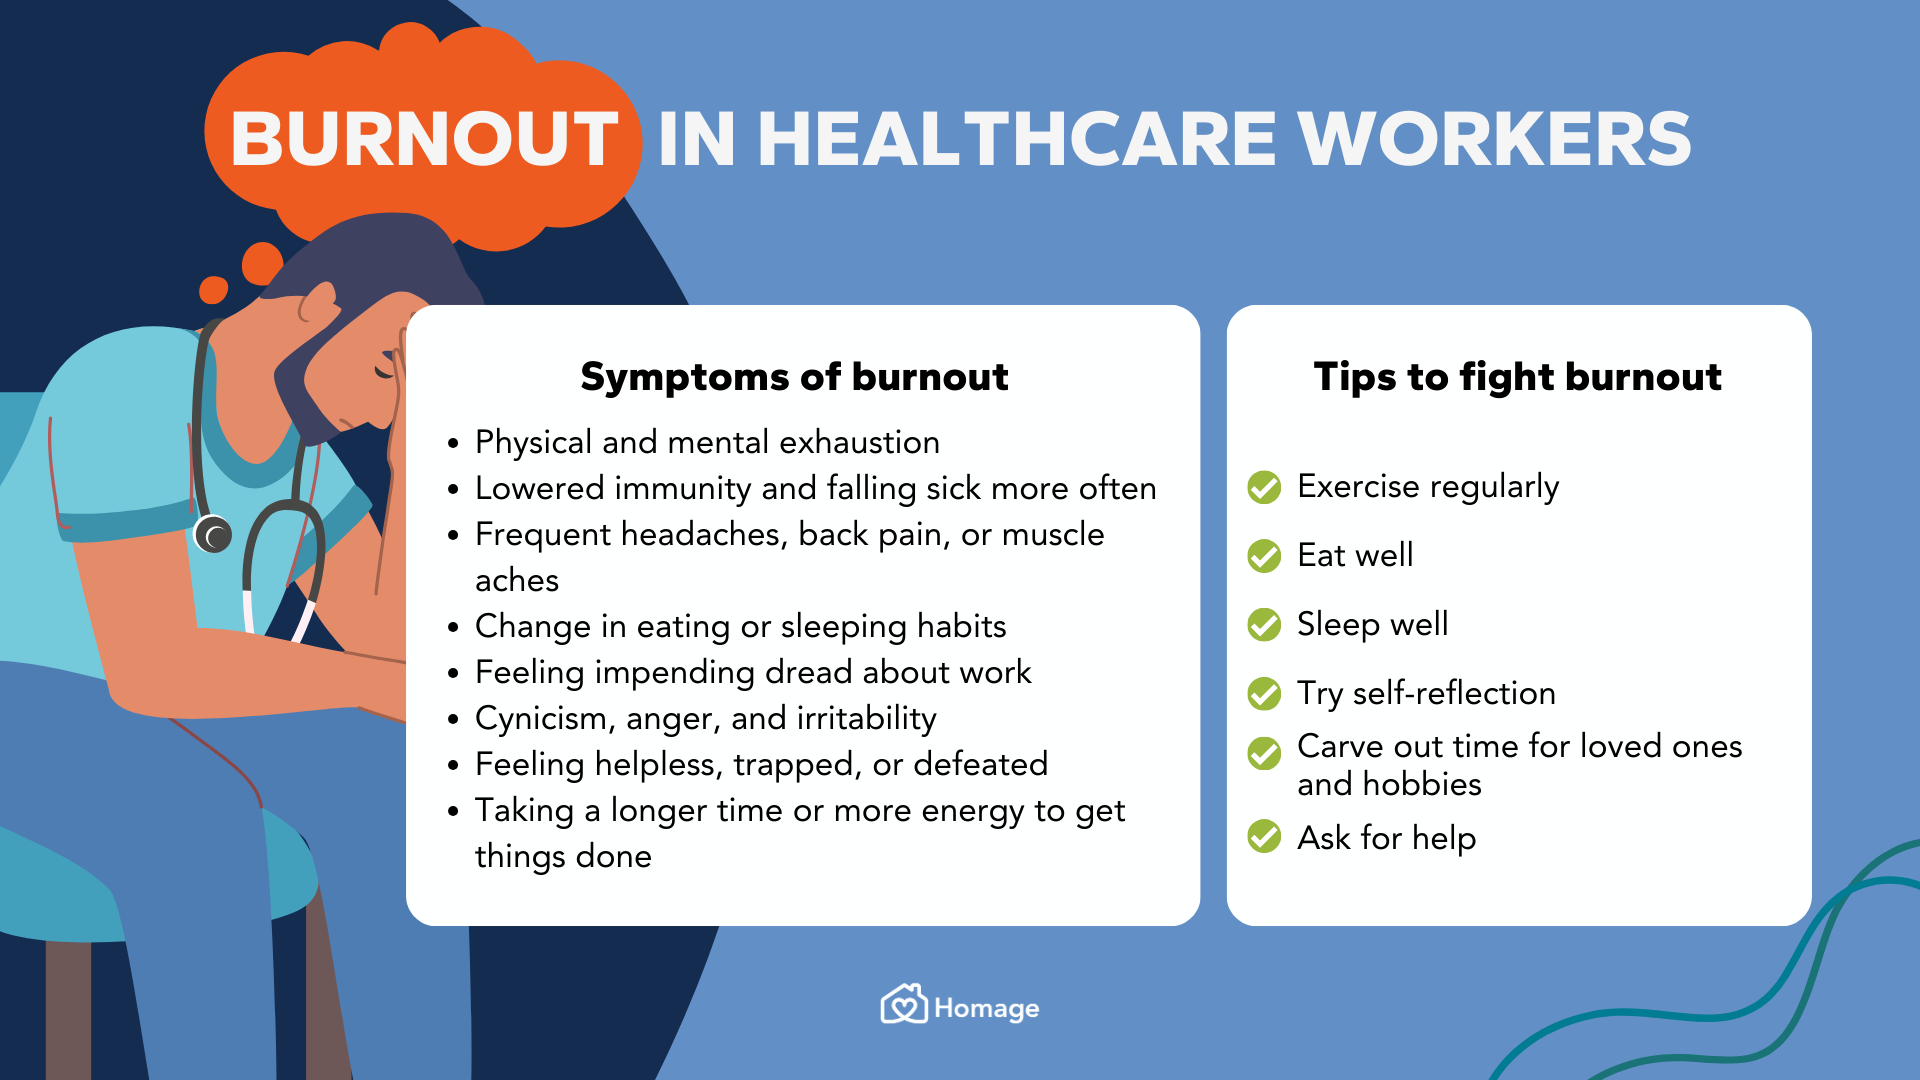 Infographic that lists symptoms of burnout in healthcare staff and ways to combat burnout